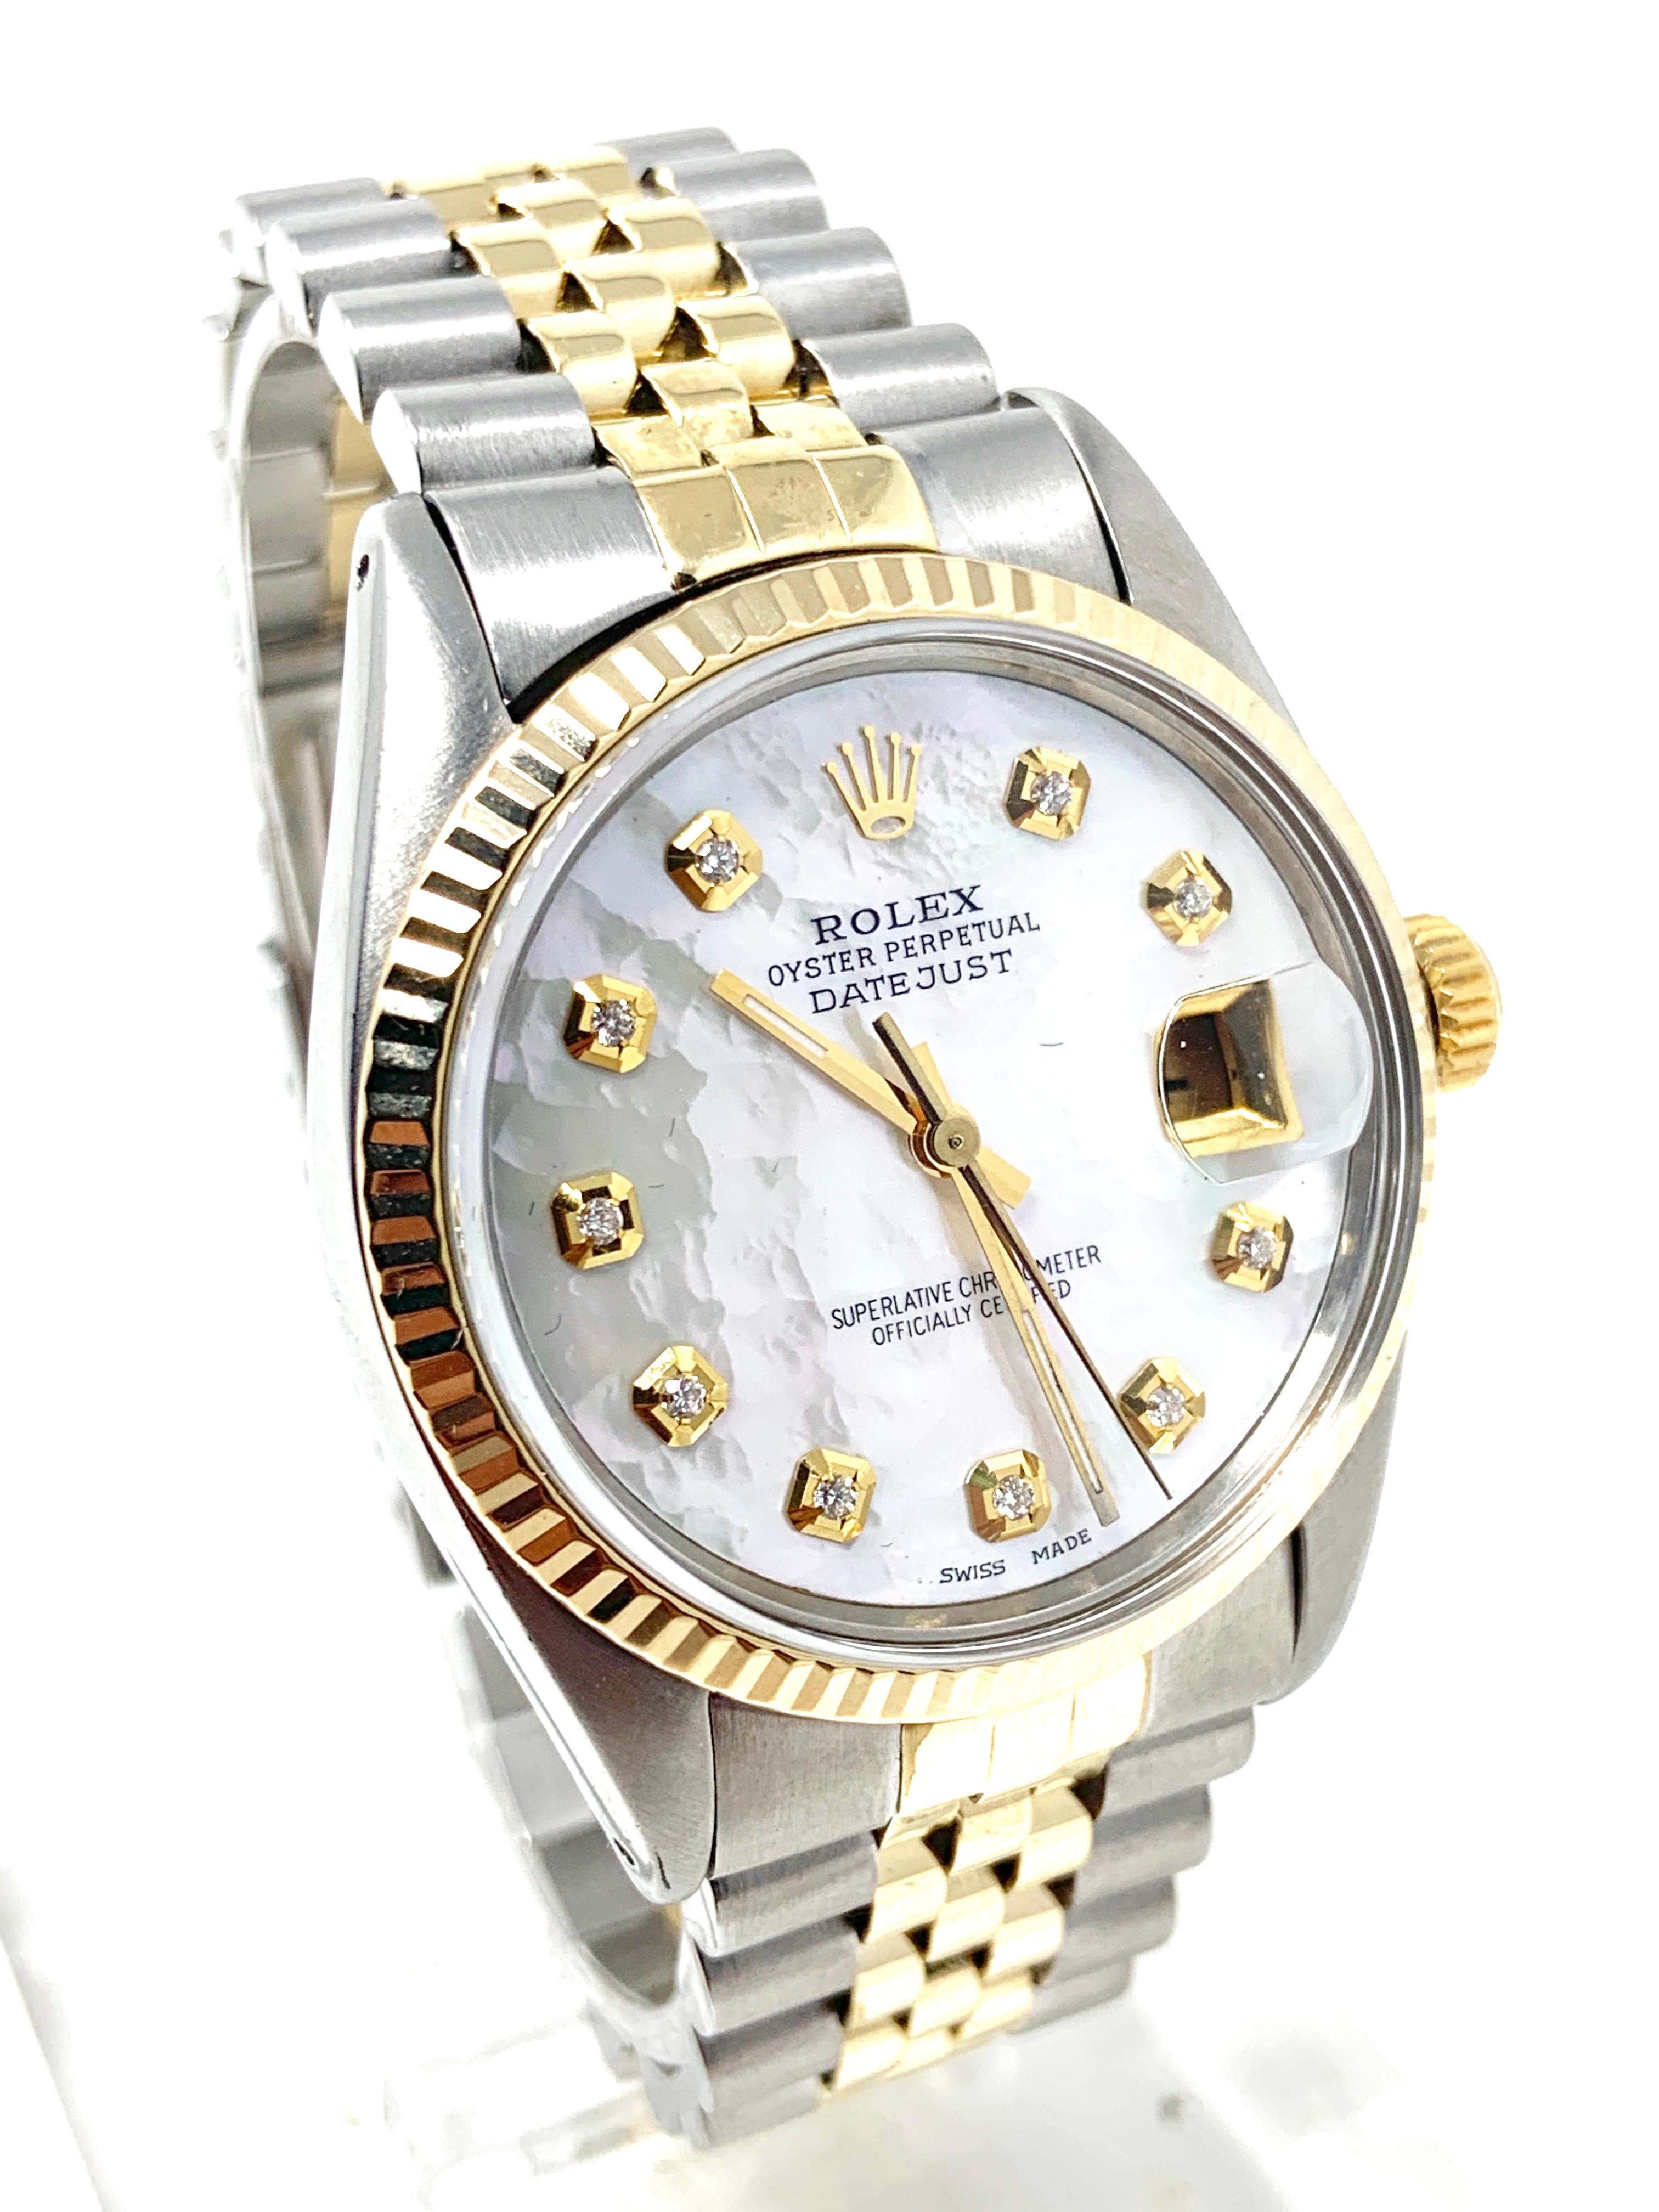 Brand - Rolex 
Model - 16013 Datejust
Case Size - 36mm
Dial - Refinished Mother of Pearl Diamond
Crystal - Acrylic 
Bezel - Yellow Gold Flute 
Movement - Automatic Cal-3035 Quick set
Wrist Band - Rolex Two-Tone Jubilee